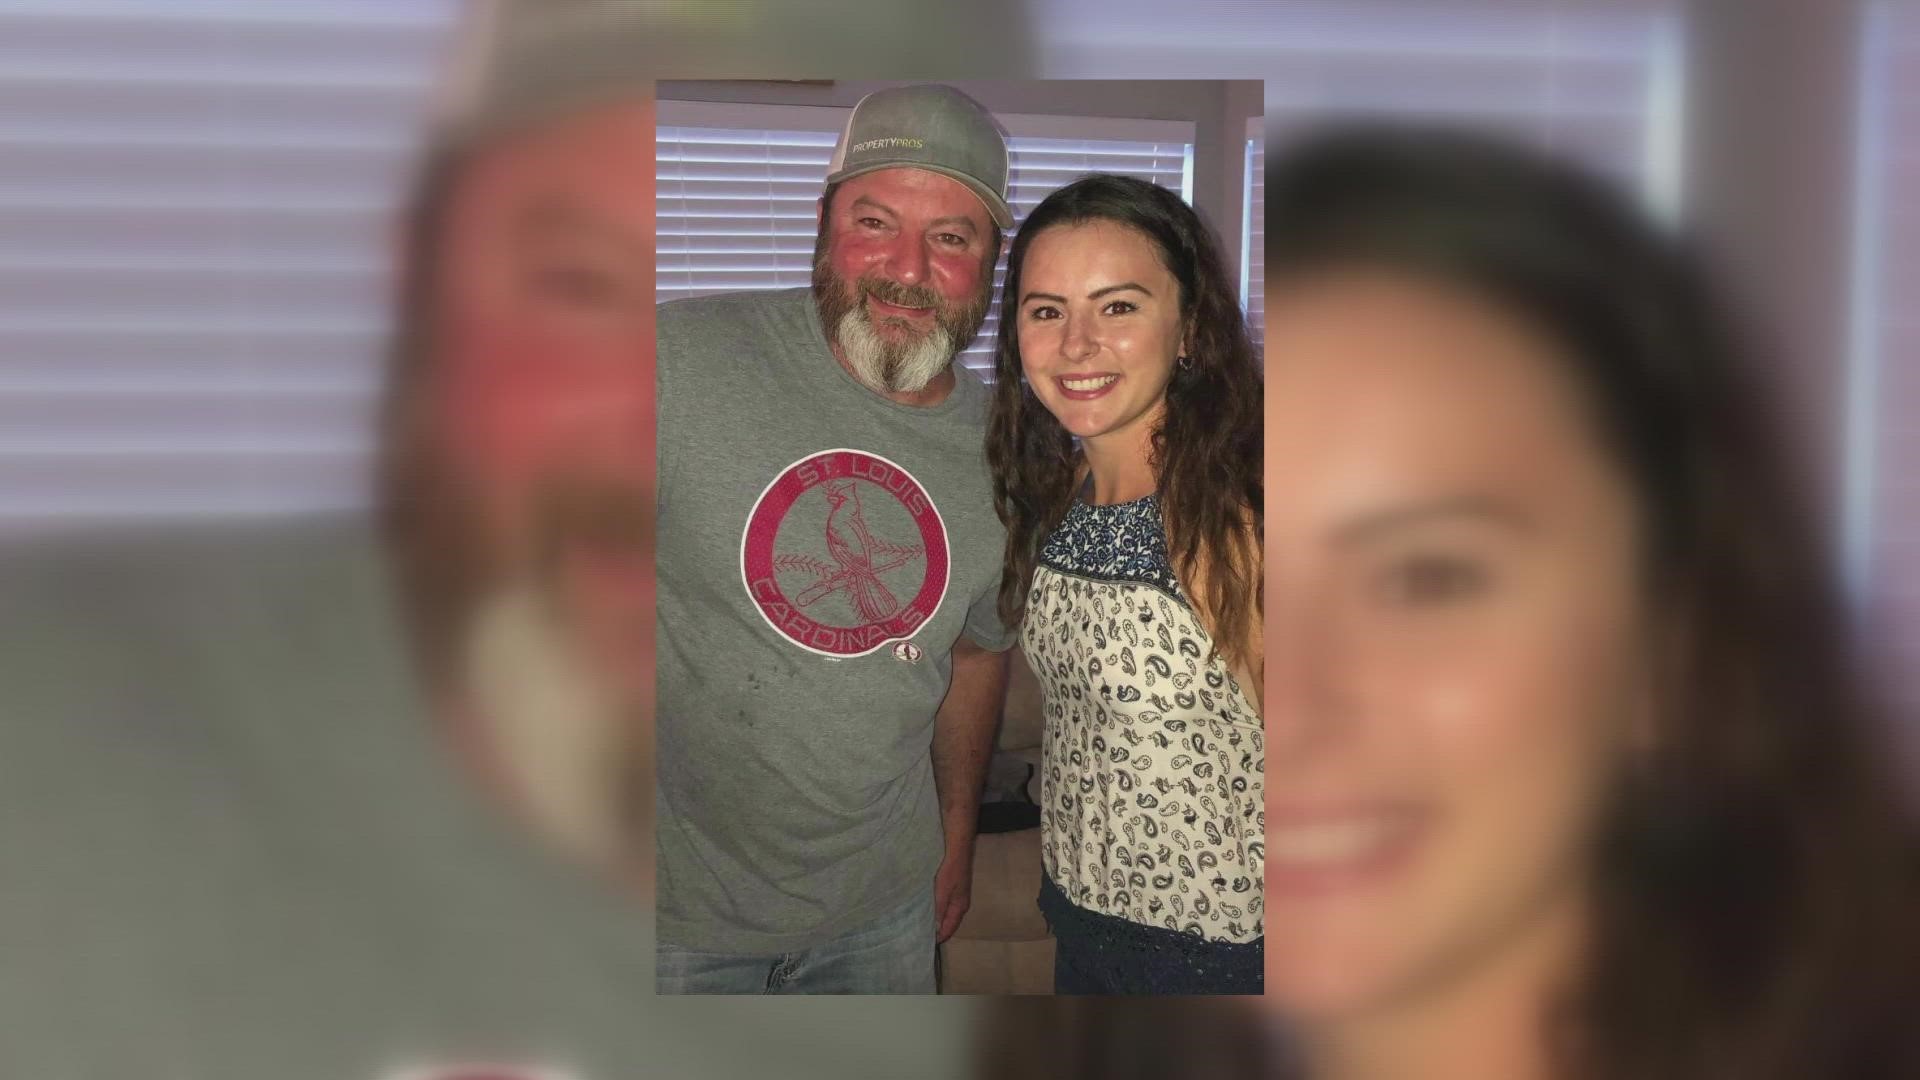 Paige Pratt has found inspiration in weight lifting after the death of her father in May. Pratt will compete in a Strongman Competition at 9 a.m. Saturday.